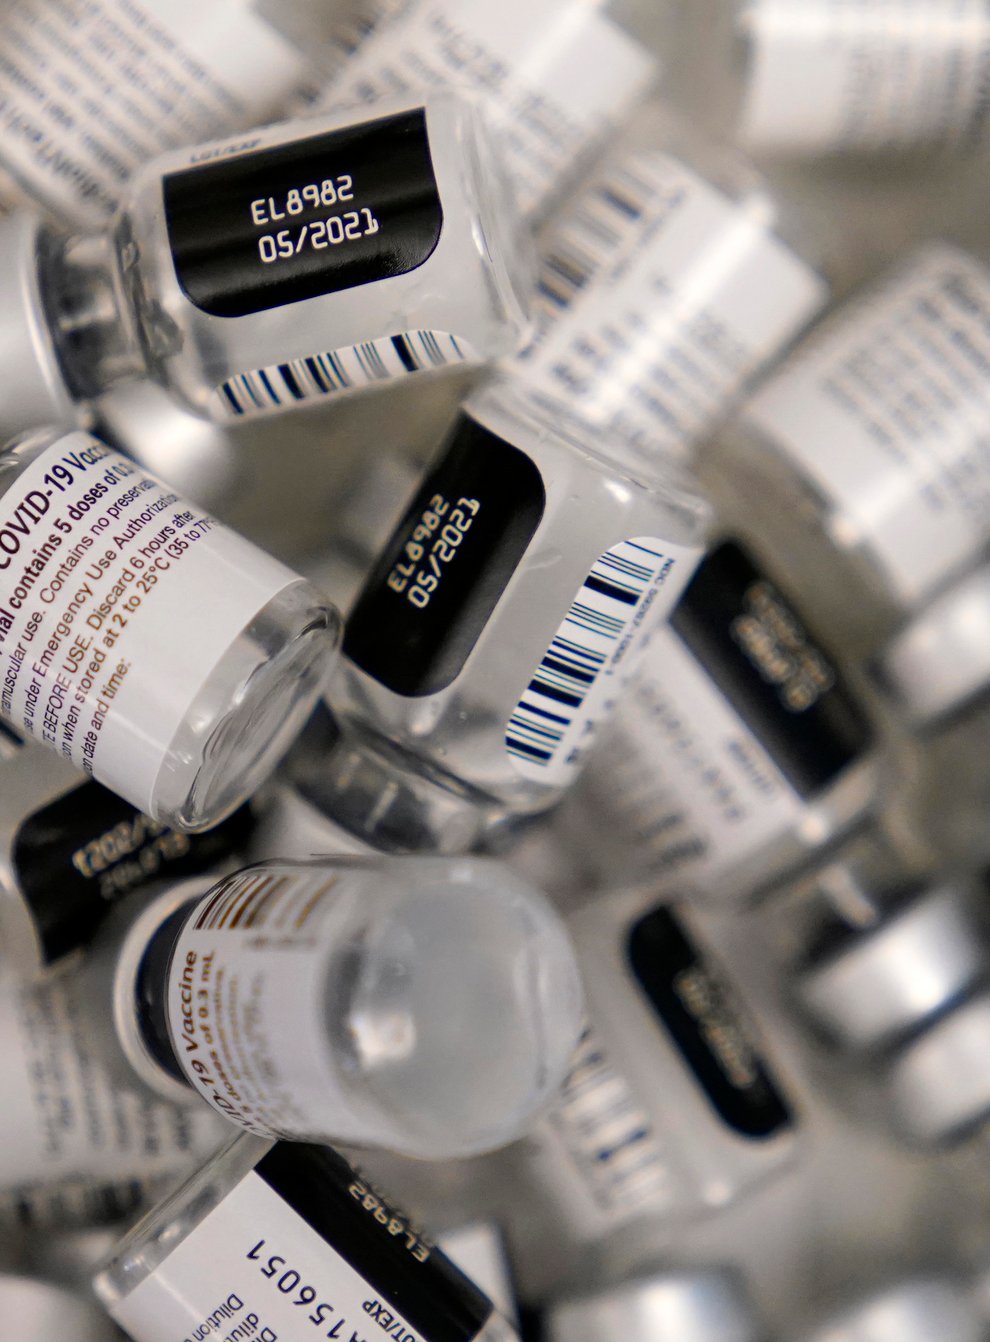 The United States is sending more than 800,000 vaccine shots to the Caribbean (John Locher/AP)